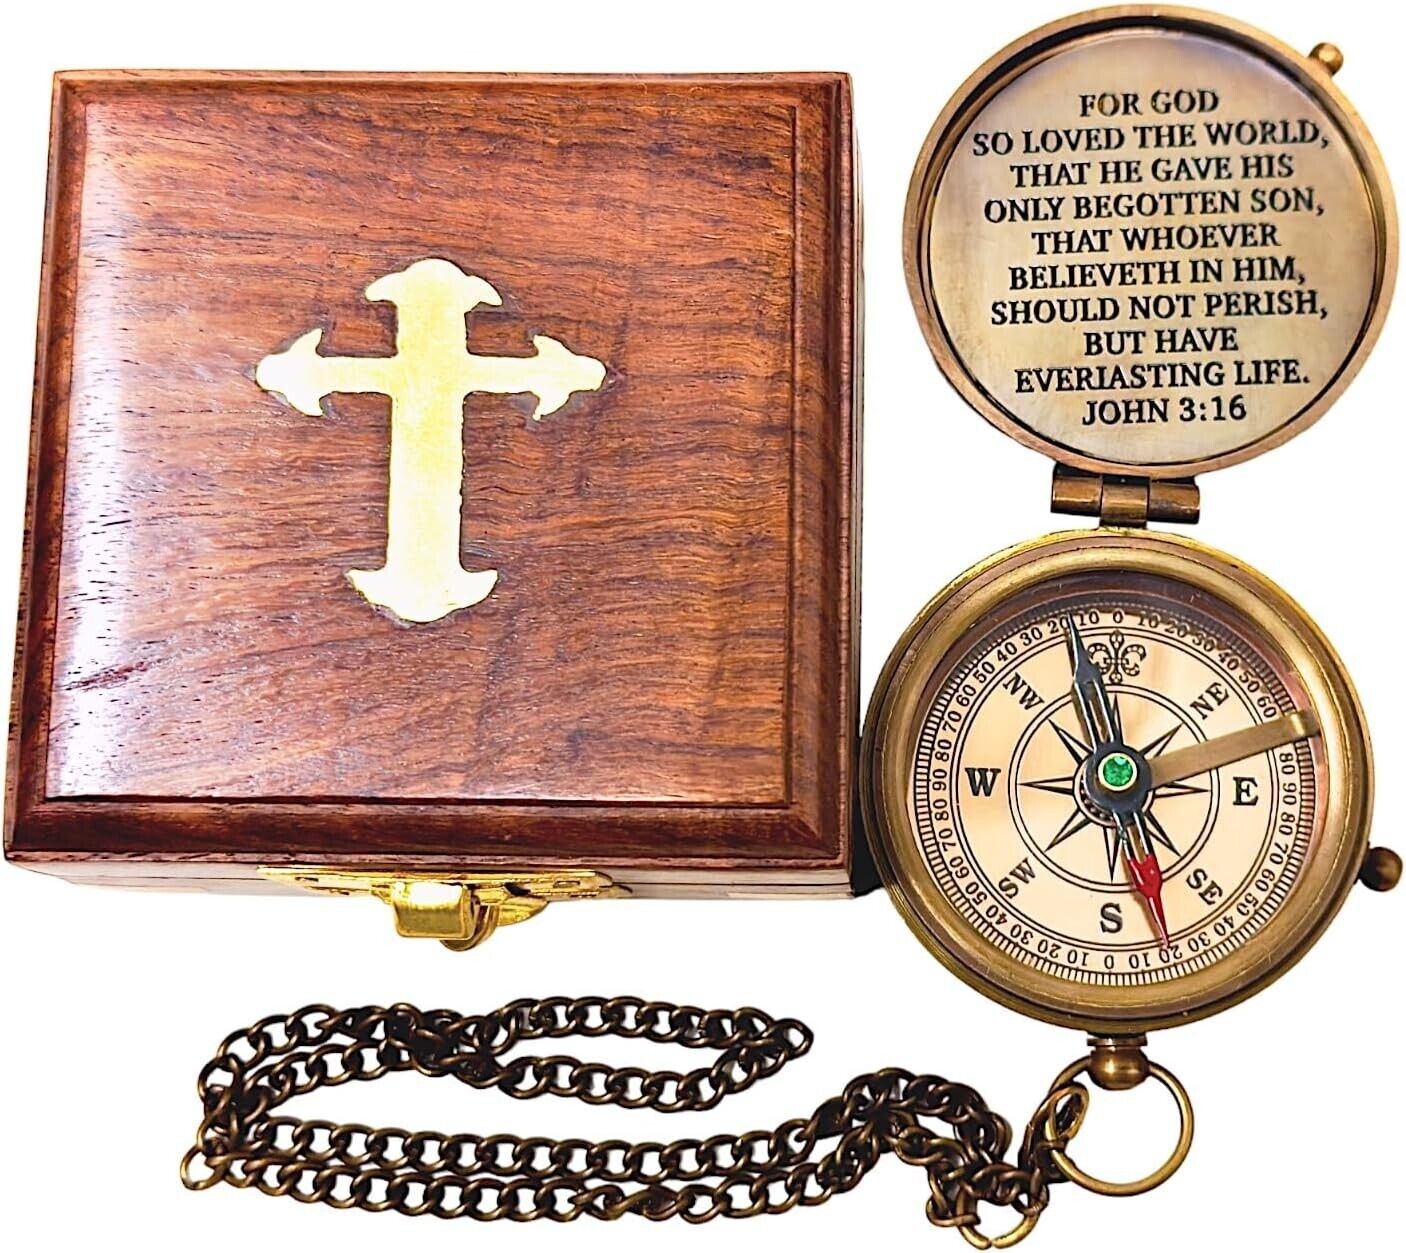 Engraved Brass Compass with Wooden Box Bible Verse Cross with John 3:16